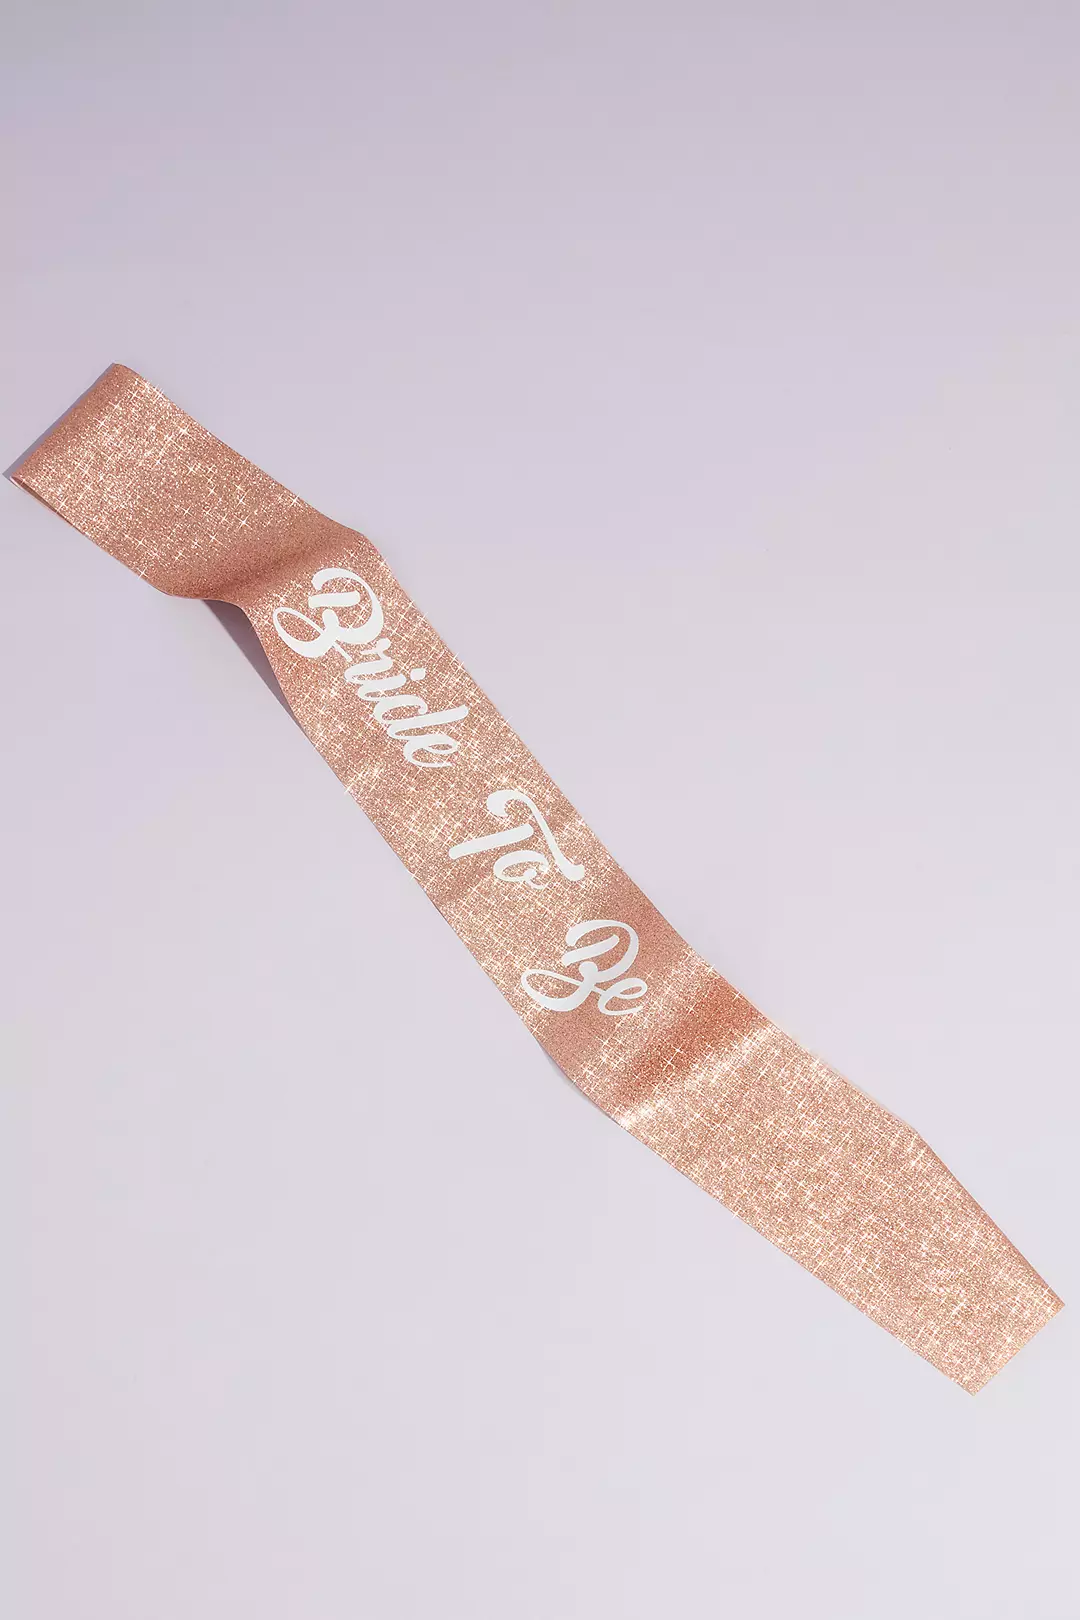 Buy Rose Gold Bride To Be Letter Banner 3m for GBP 1.79